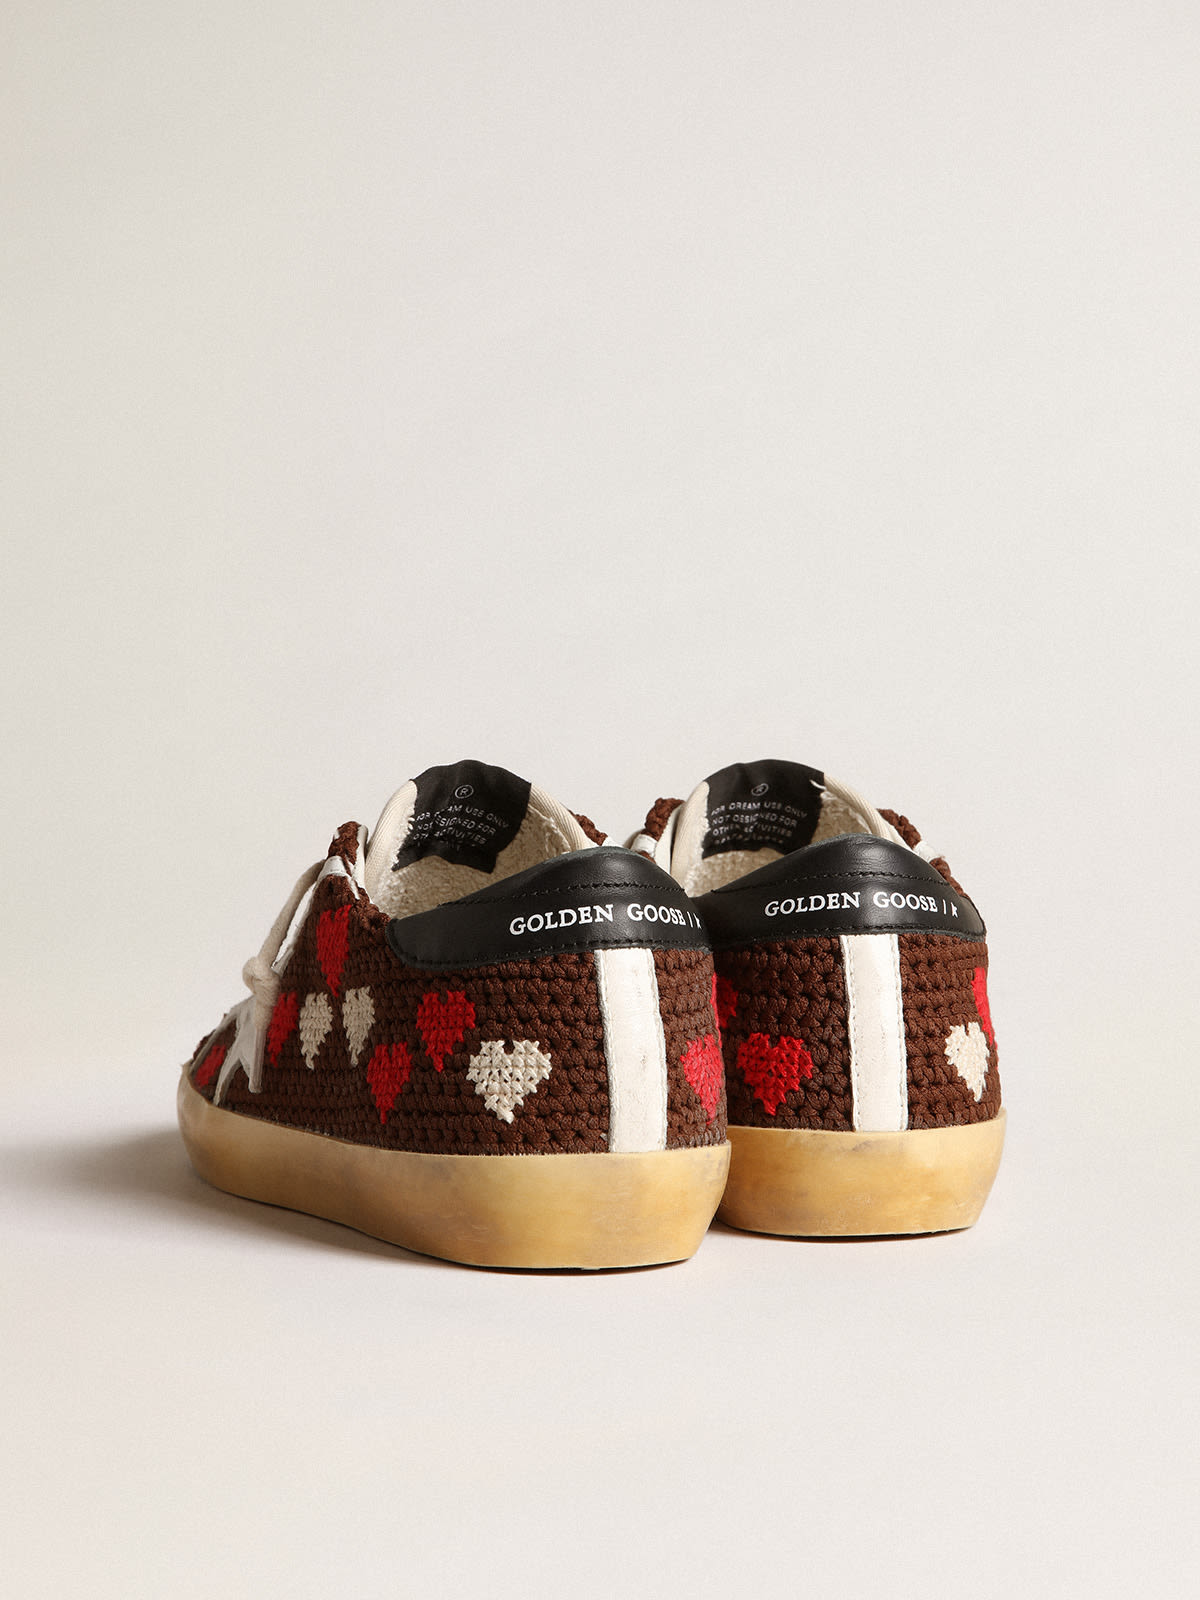 Golden Goose - Super-Star LTD in brown crochet with embroidered hearts and white star in 